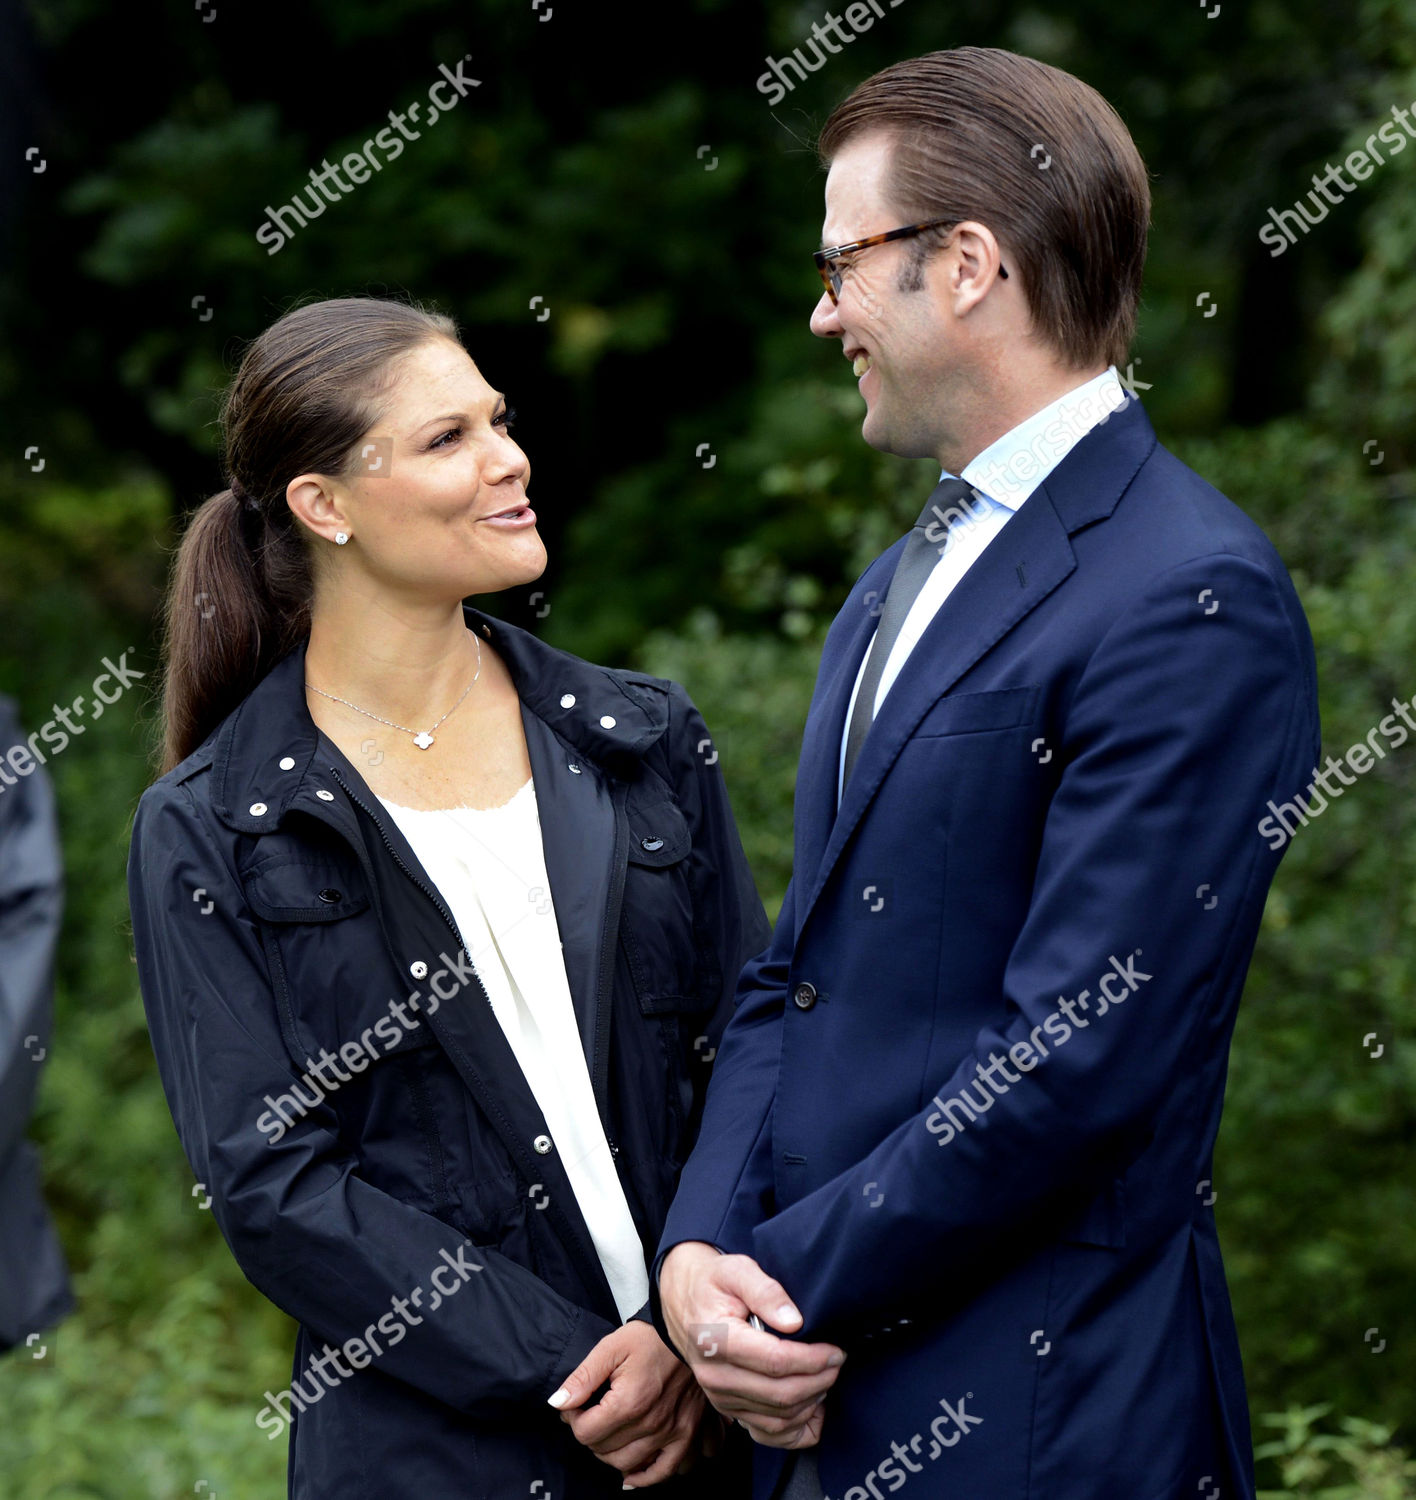 swedish-royals-opening-a-love-path-at-the-djurgarden-royal-park-in-stockholm-sweden-shutterstock-editorial-1827470f.jpg